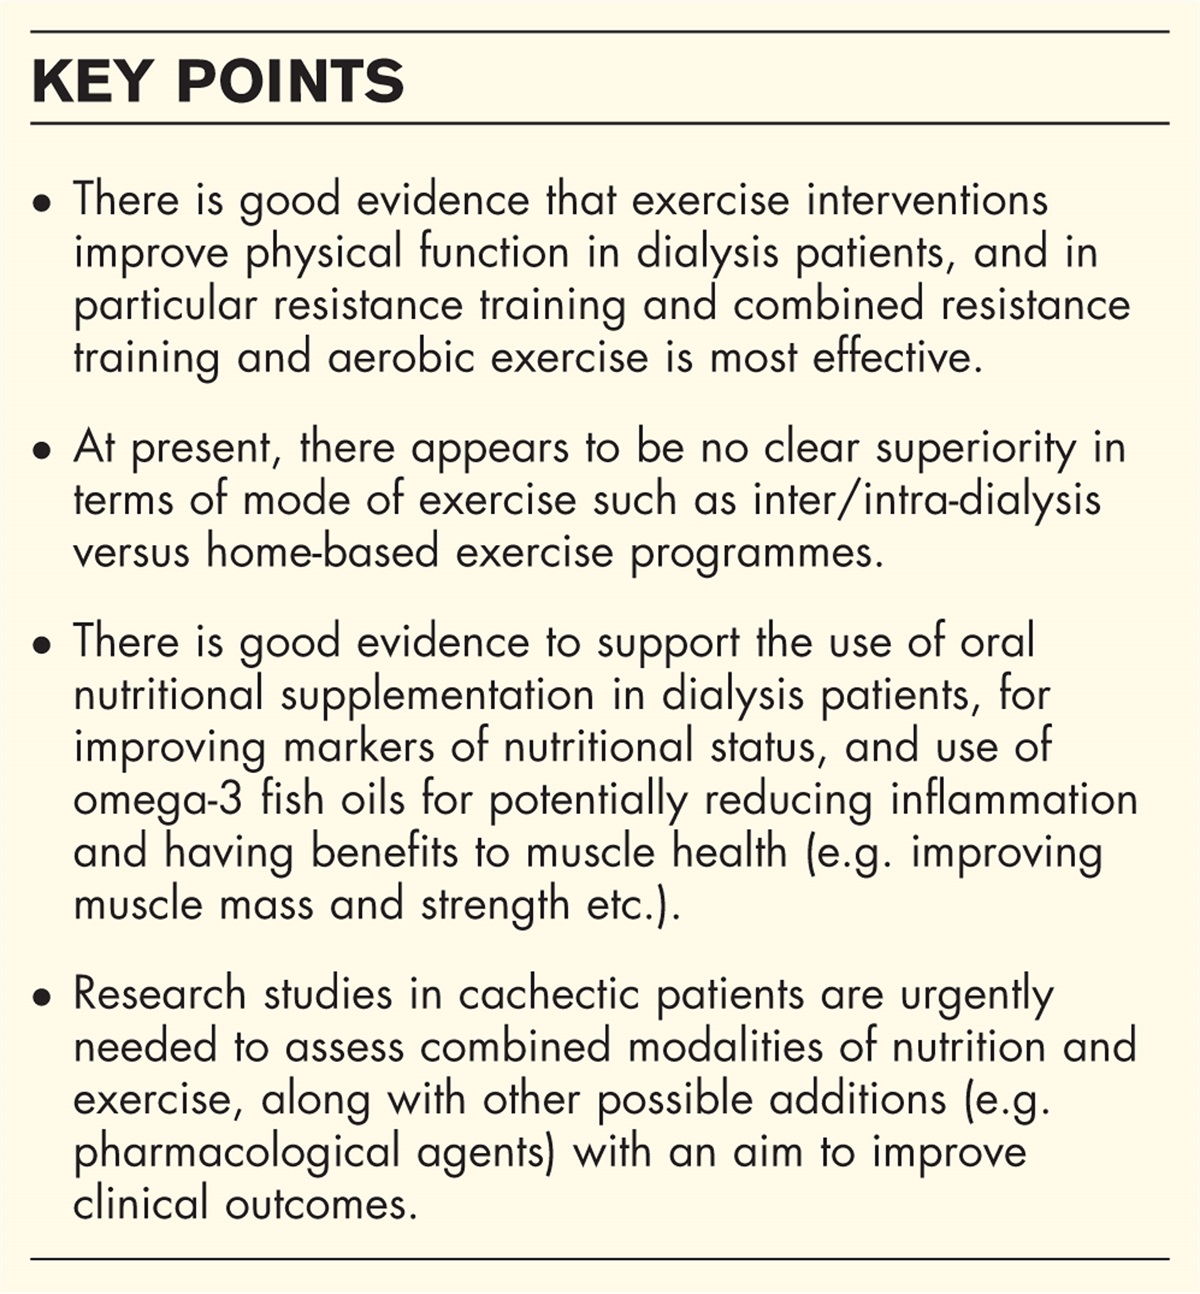 Exercise and nutrition interventions for renal cachexia